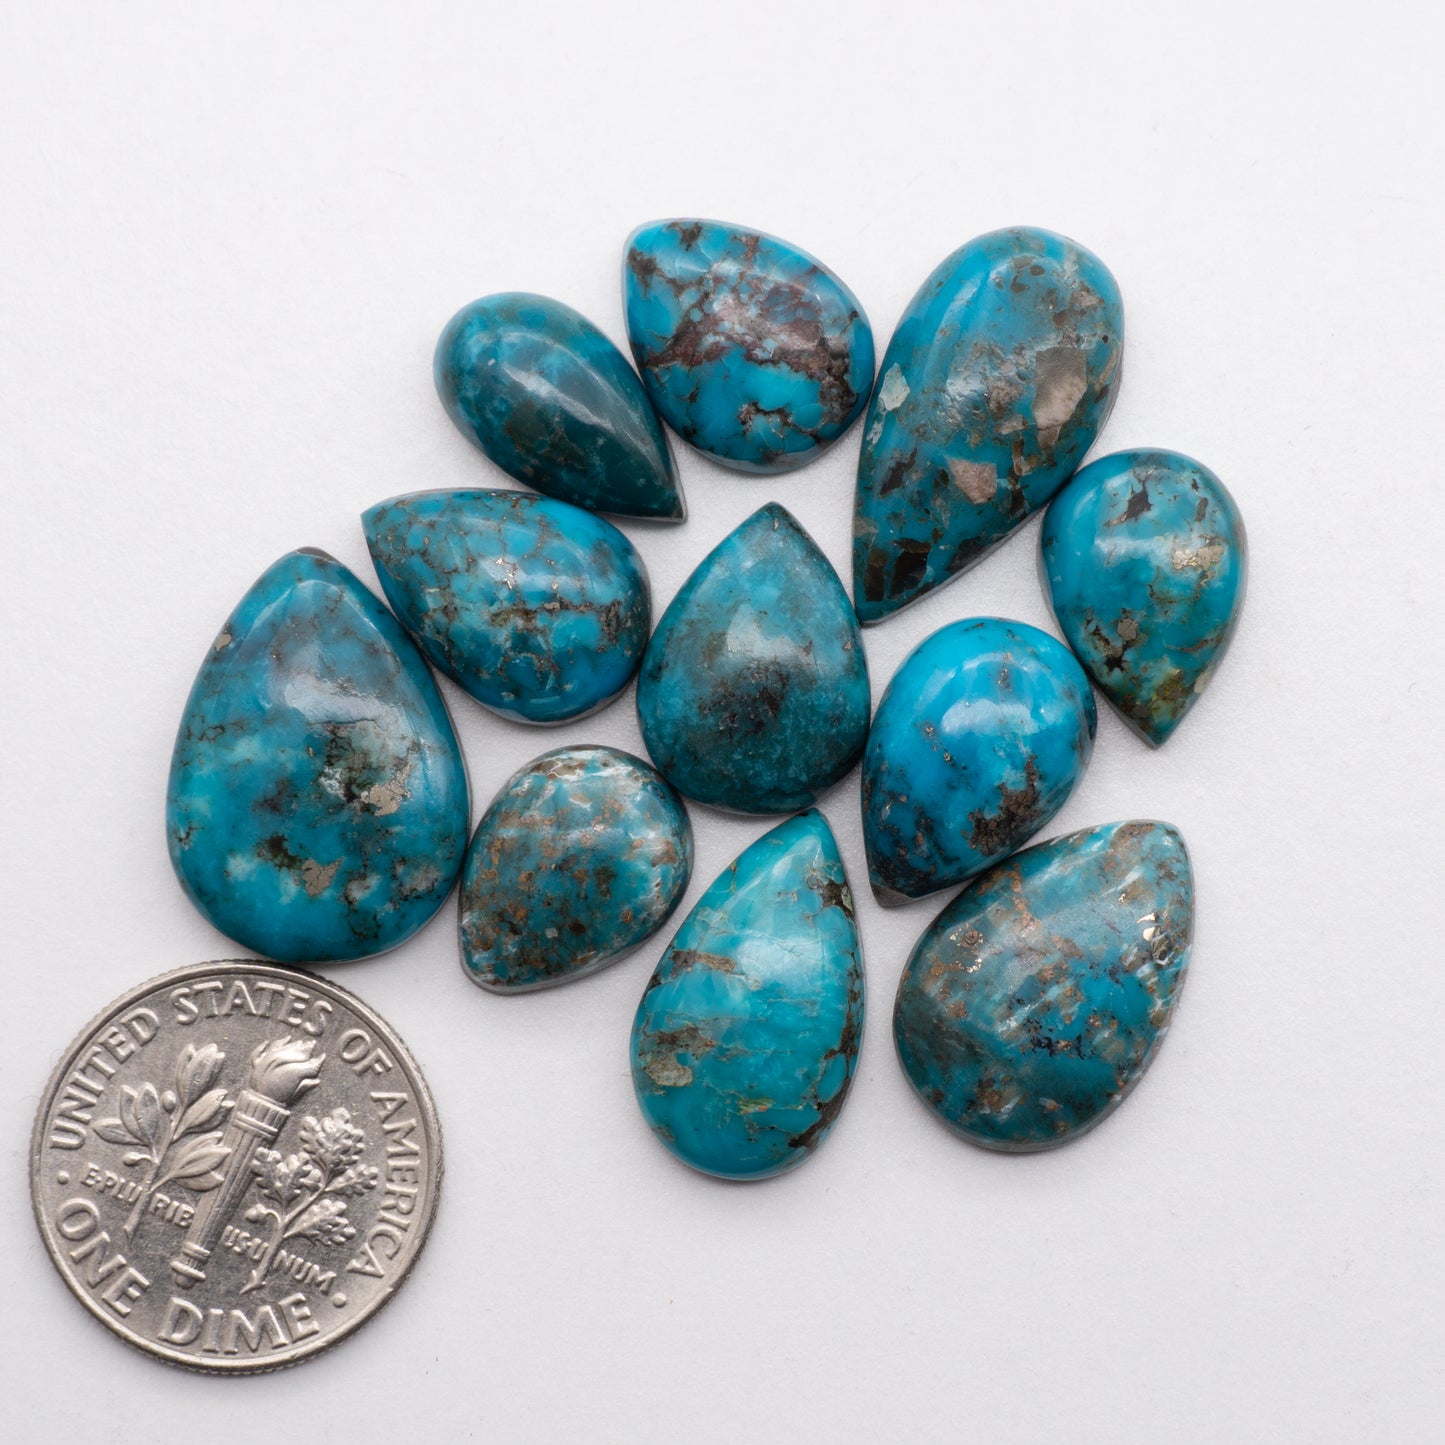 Add unique splashes of color to your jewelry with our Kingman Turquoise. Featuring natural blue hues, these cabochons offer a beautiful contrast to any design. These cabochons are backed for added strength, perfect for necklaces, earrings, and more!